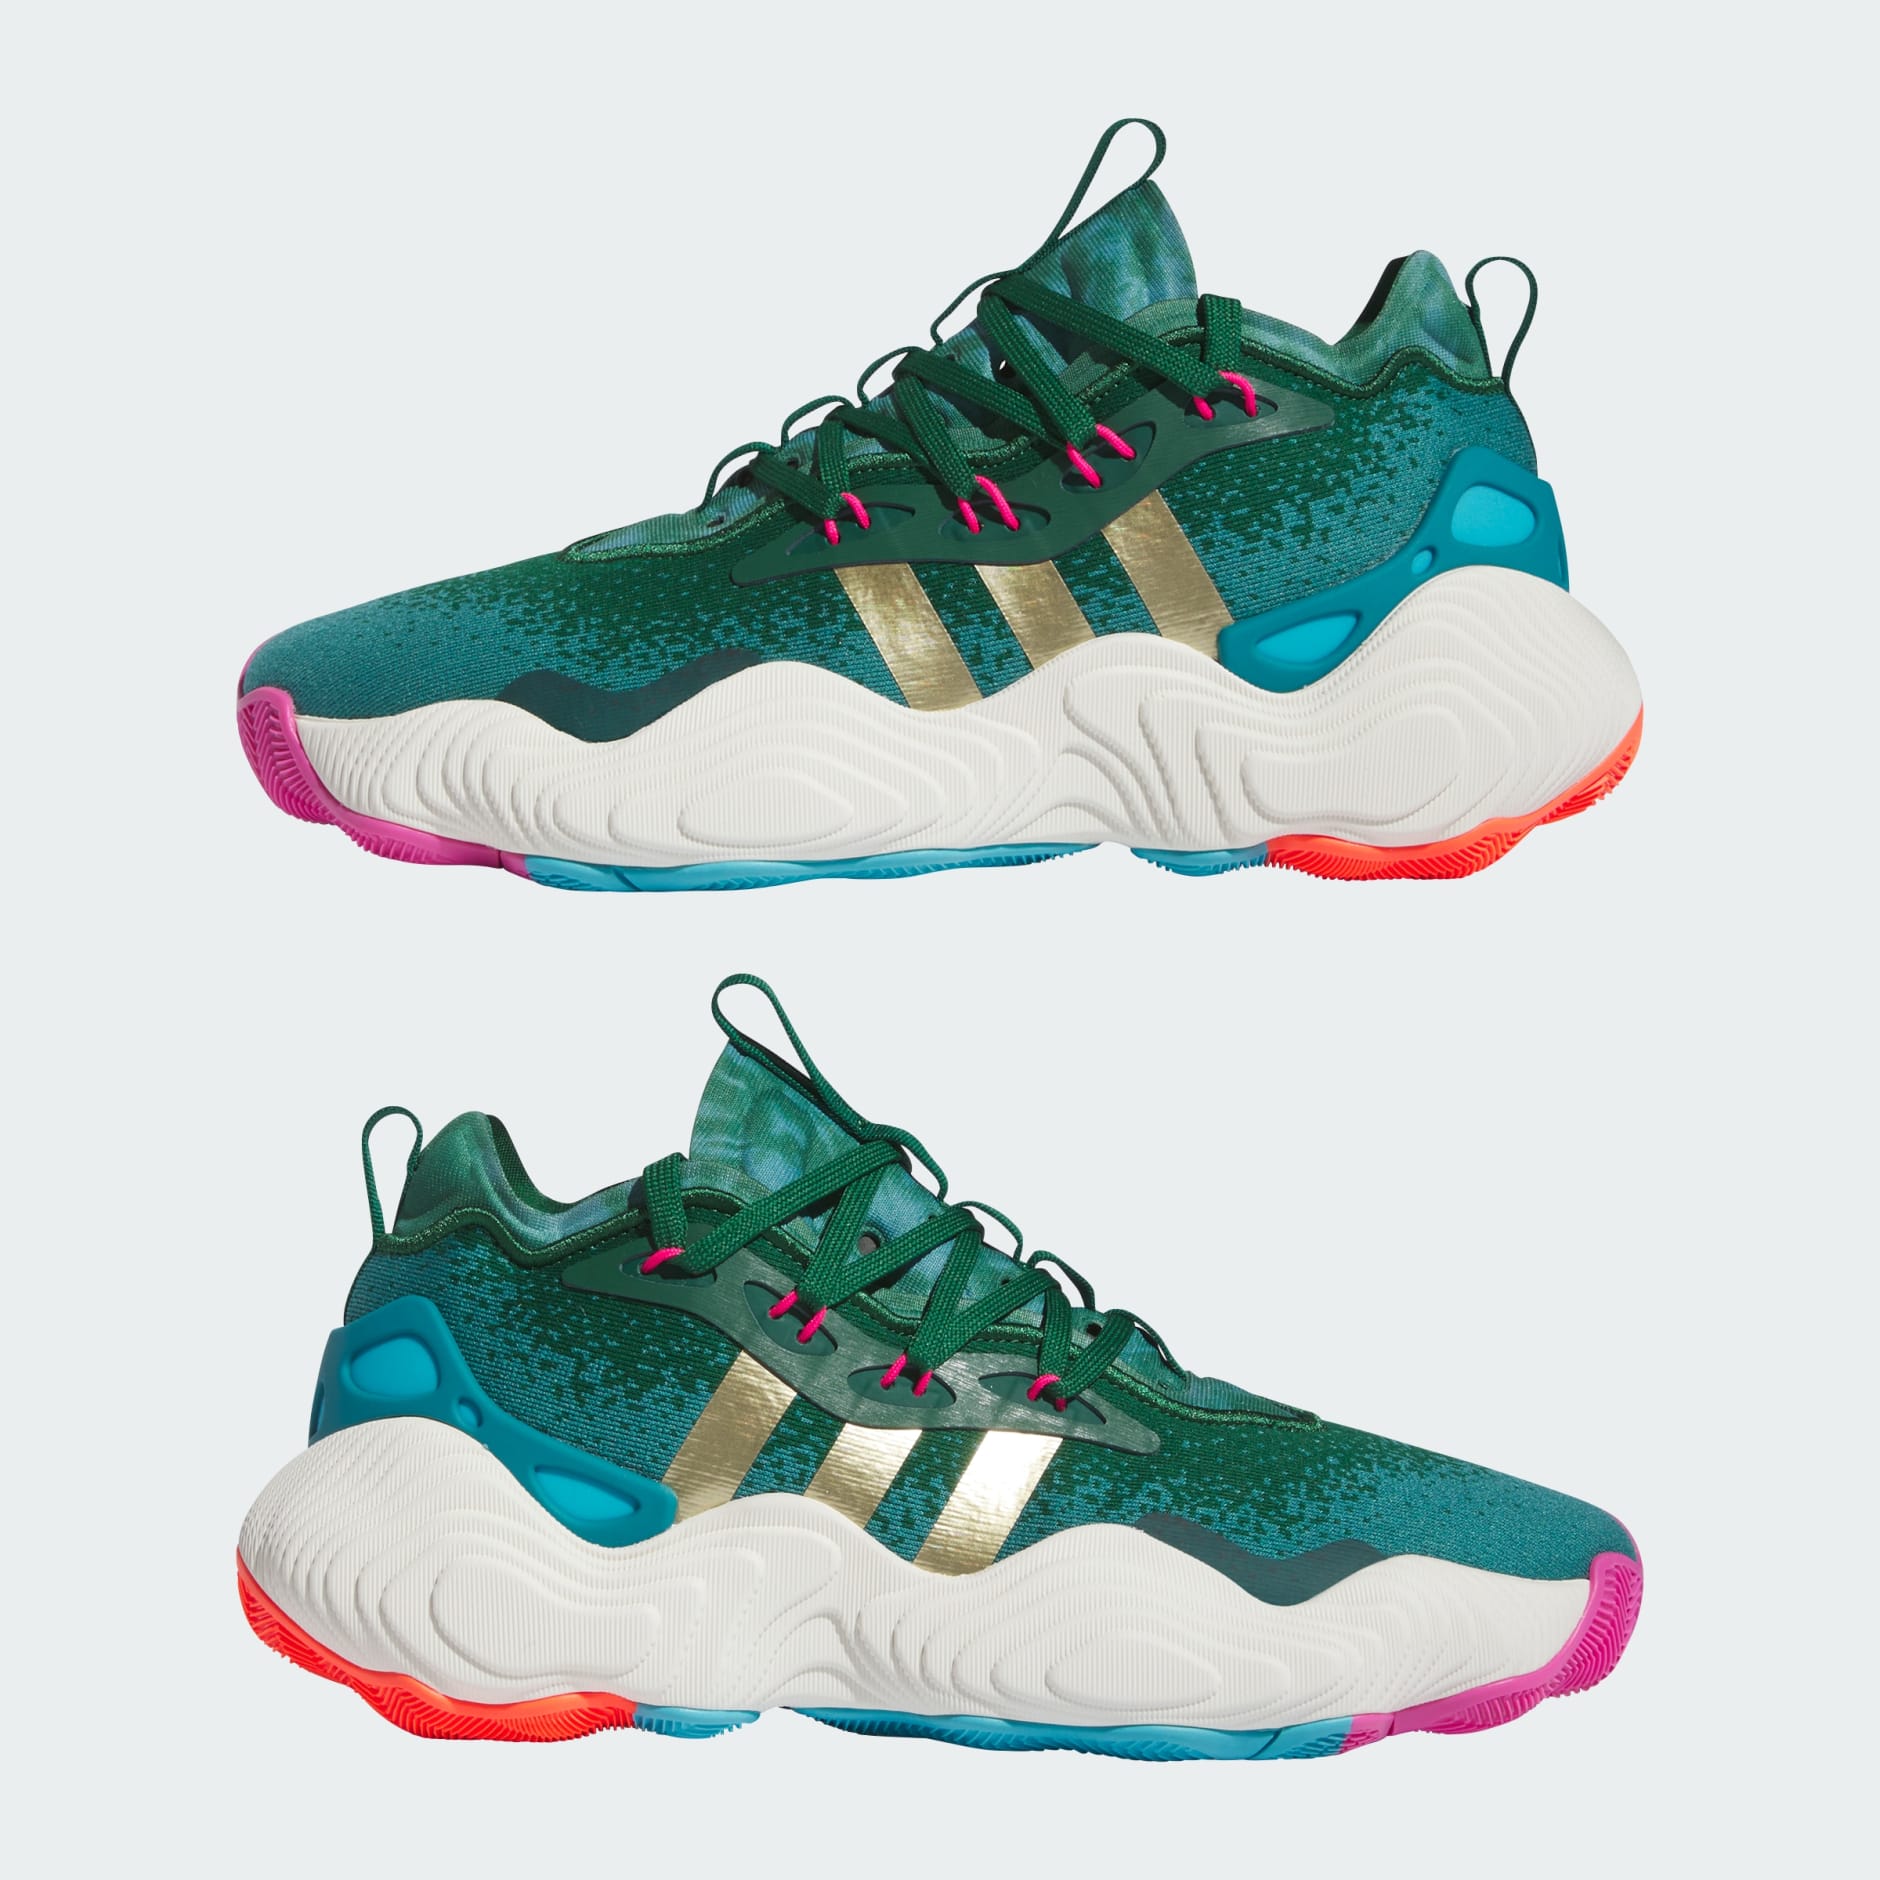 Adidas Crazy BYW LVL X (Mens Size 11) - clothing & accessories